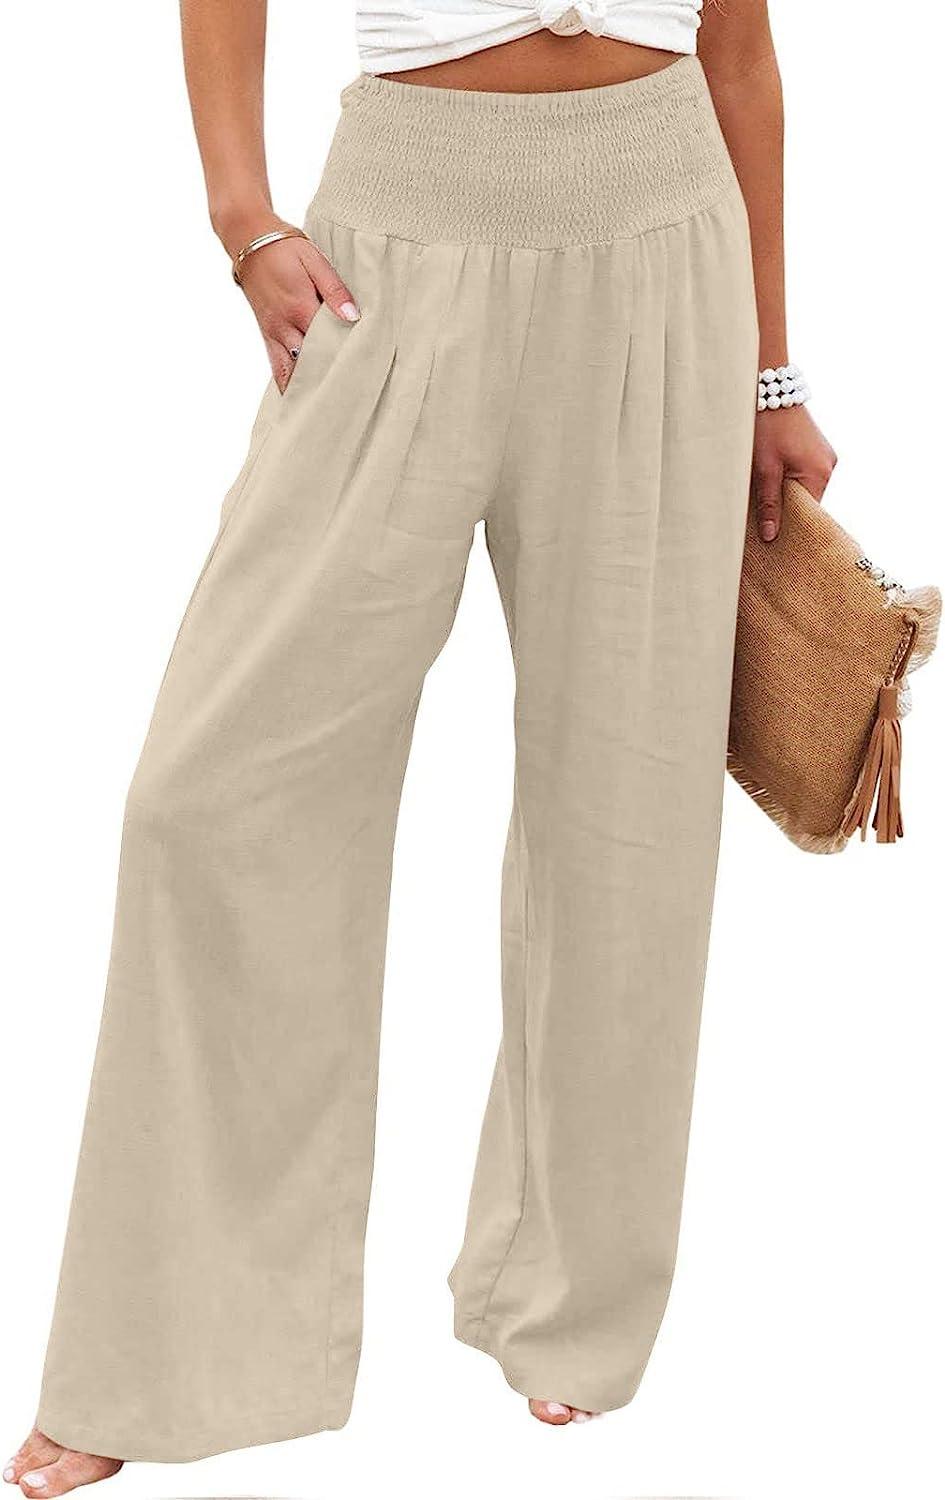 JEGULV Linen Pants for Women Casual Summer High Waist Wide Leg Palazzo  Lounge Pants Solid Baggy Pant Trousers with Pocket D01#khaki Small